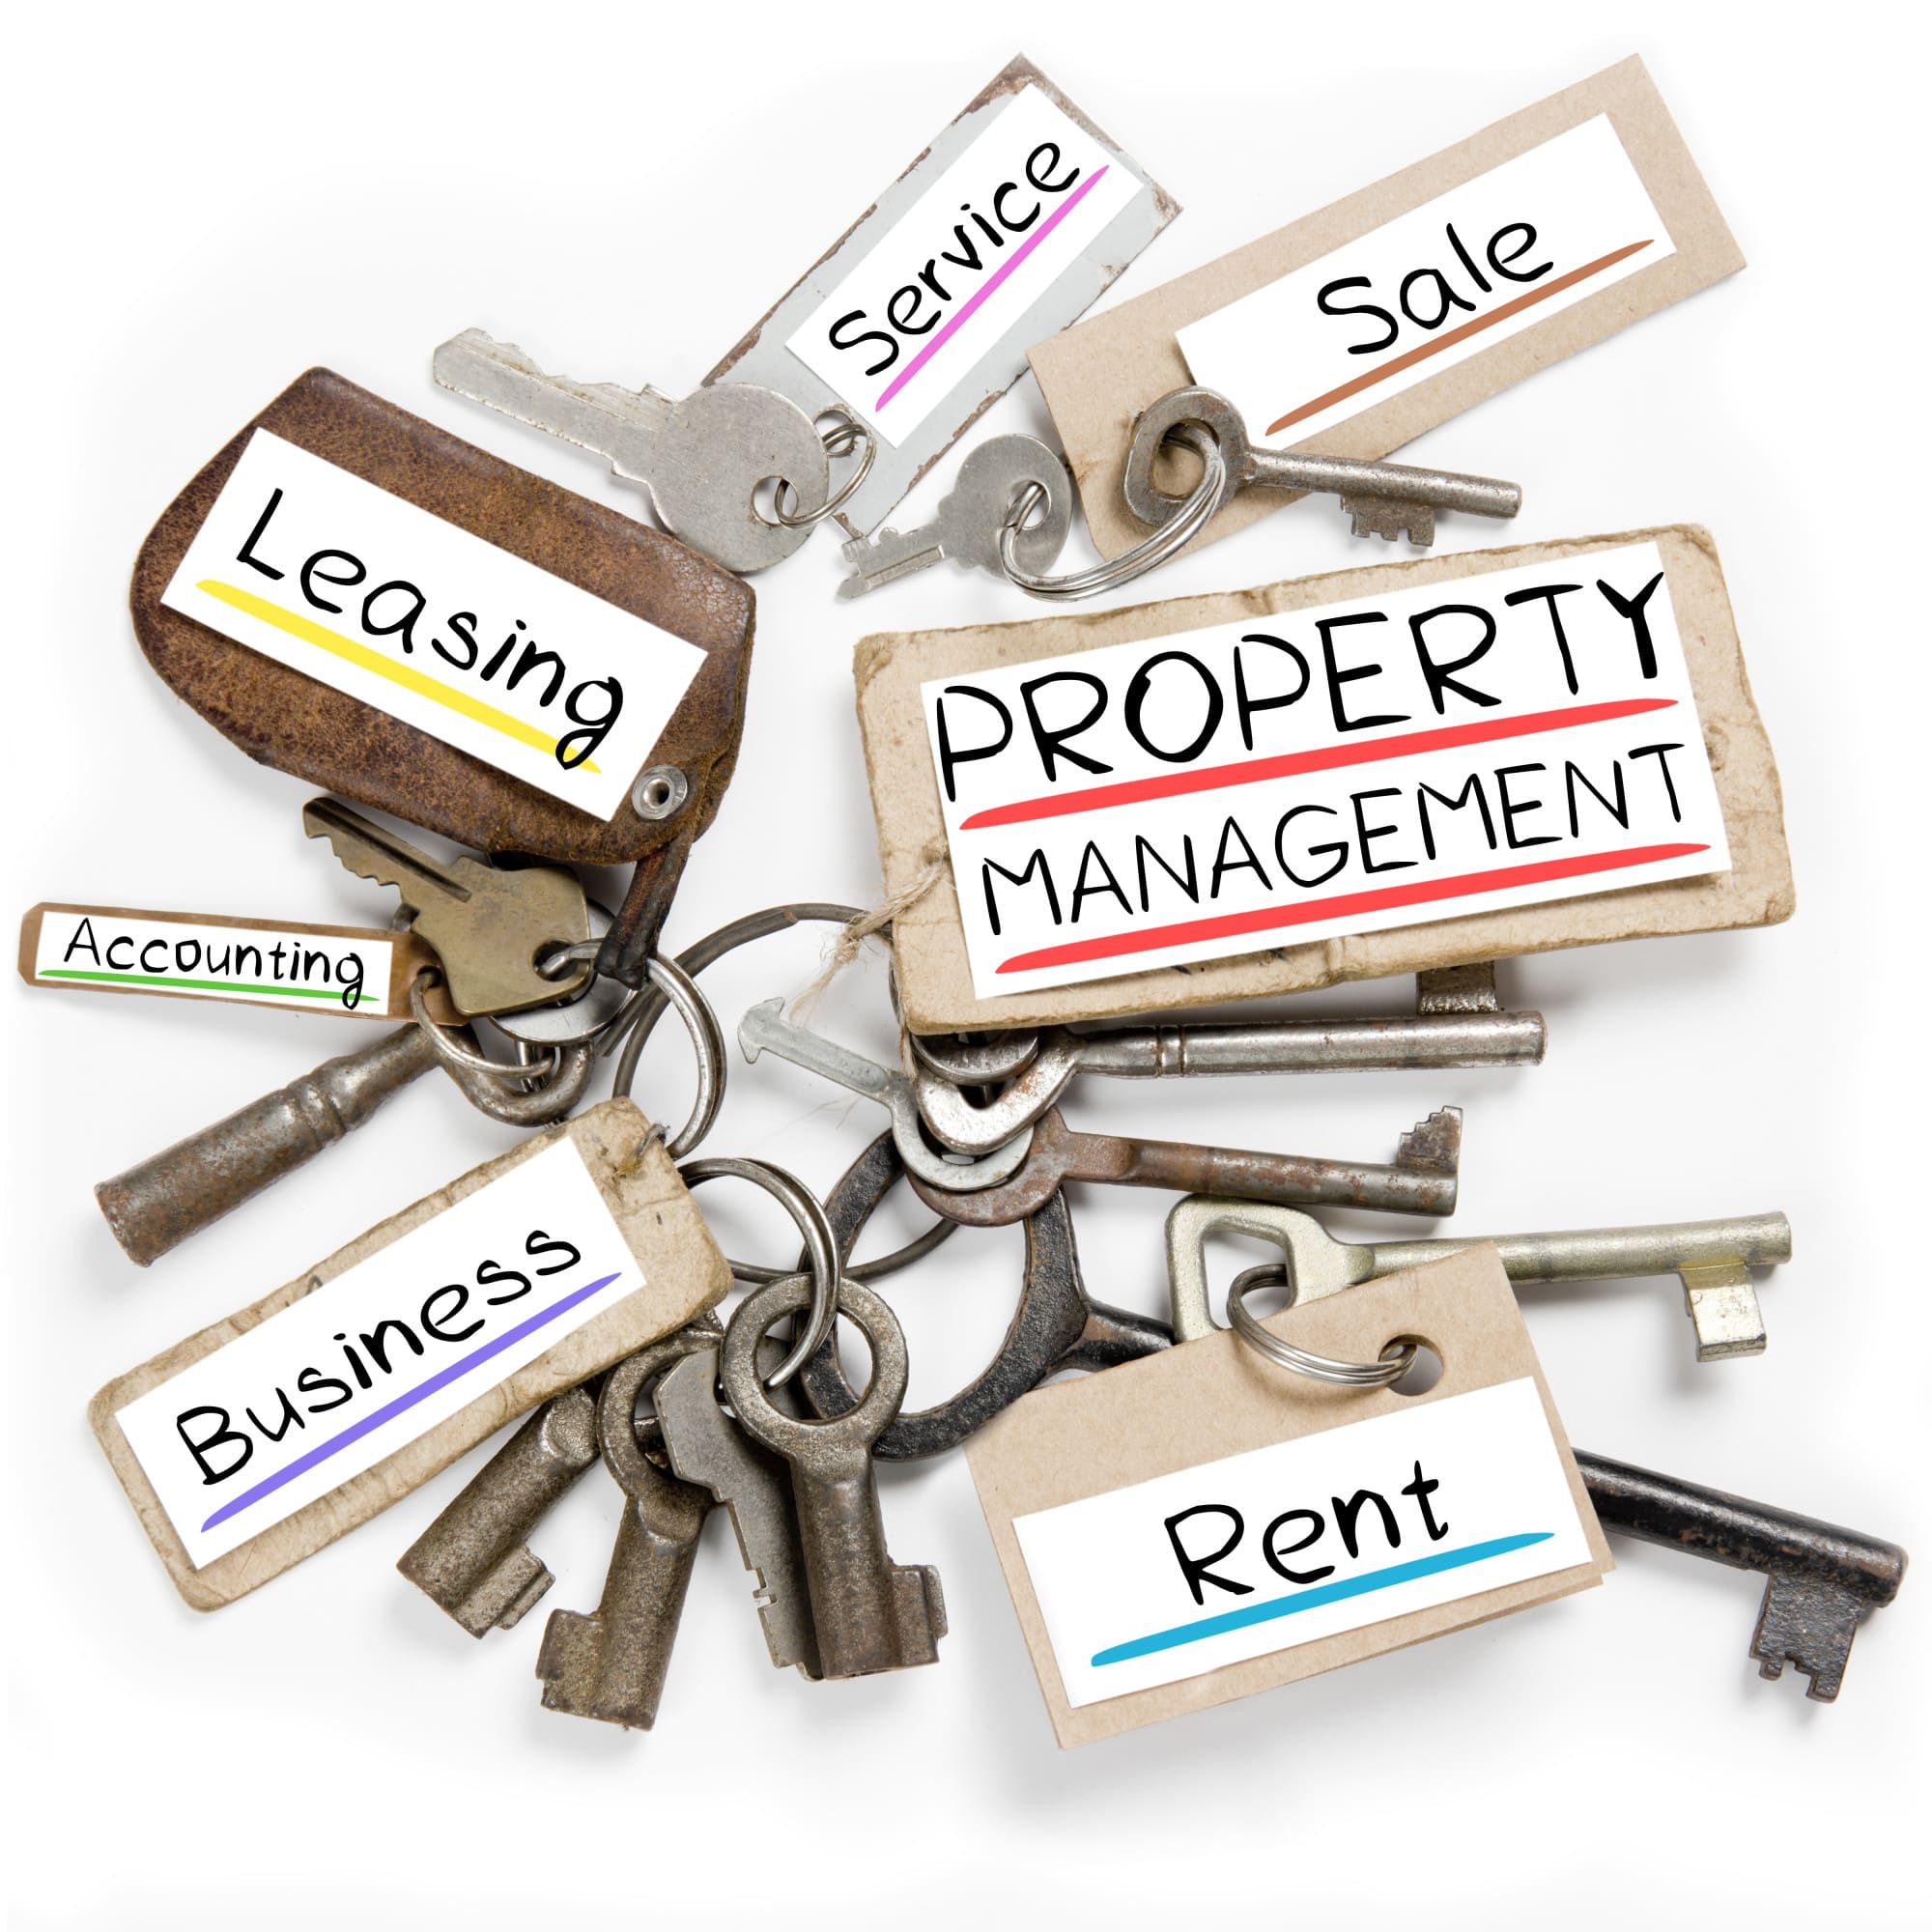 How to Improve Property Management: Everything You Need to Know